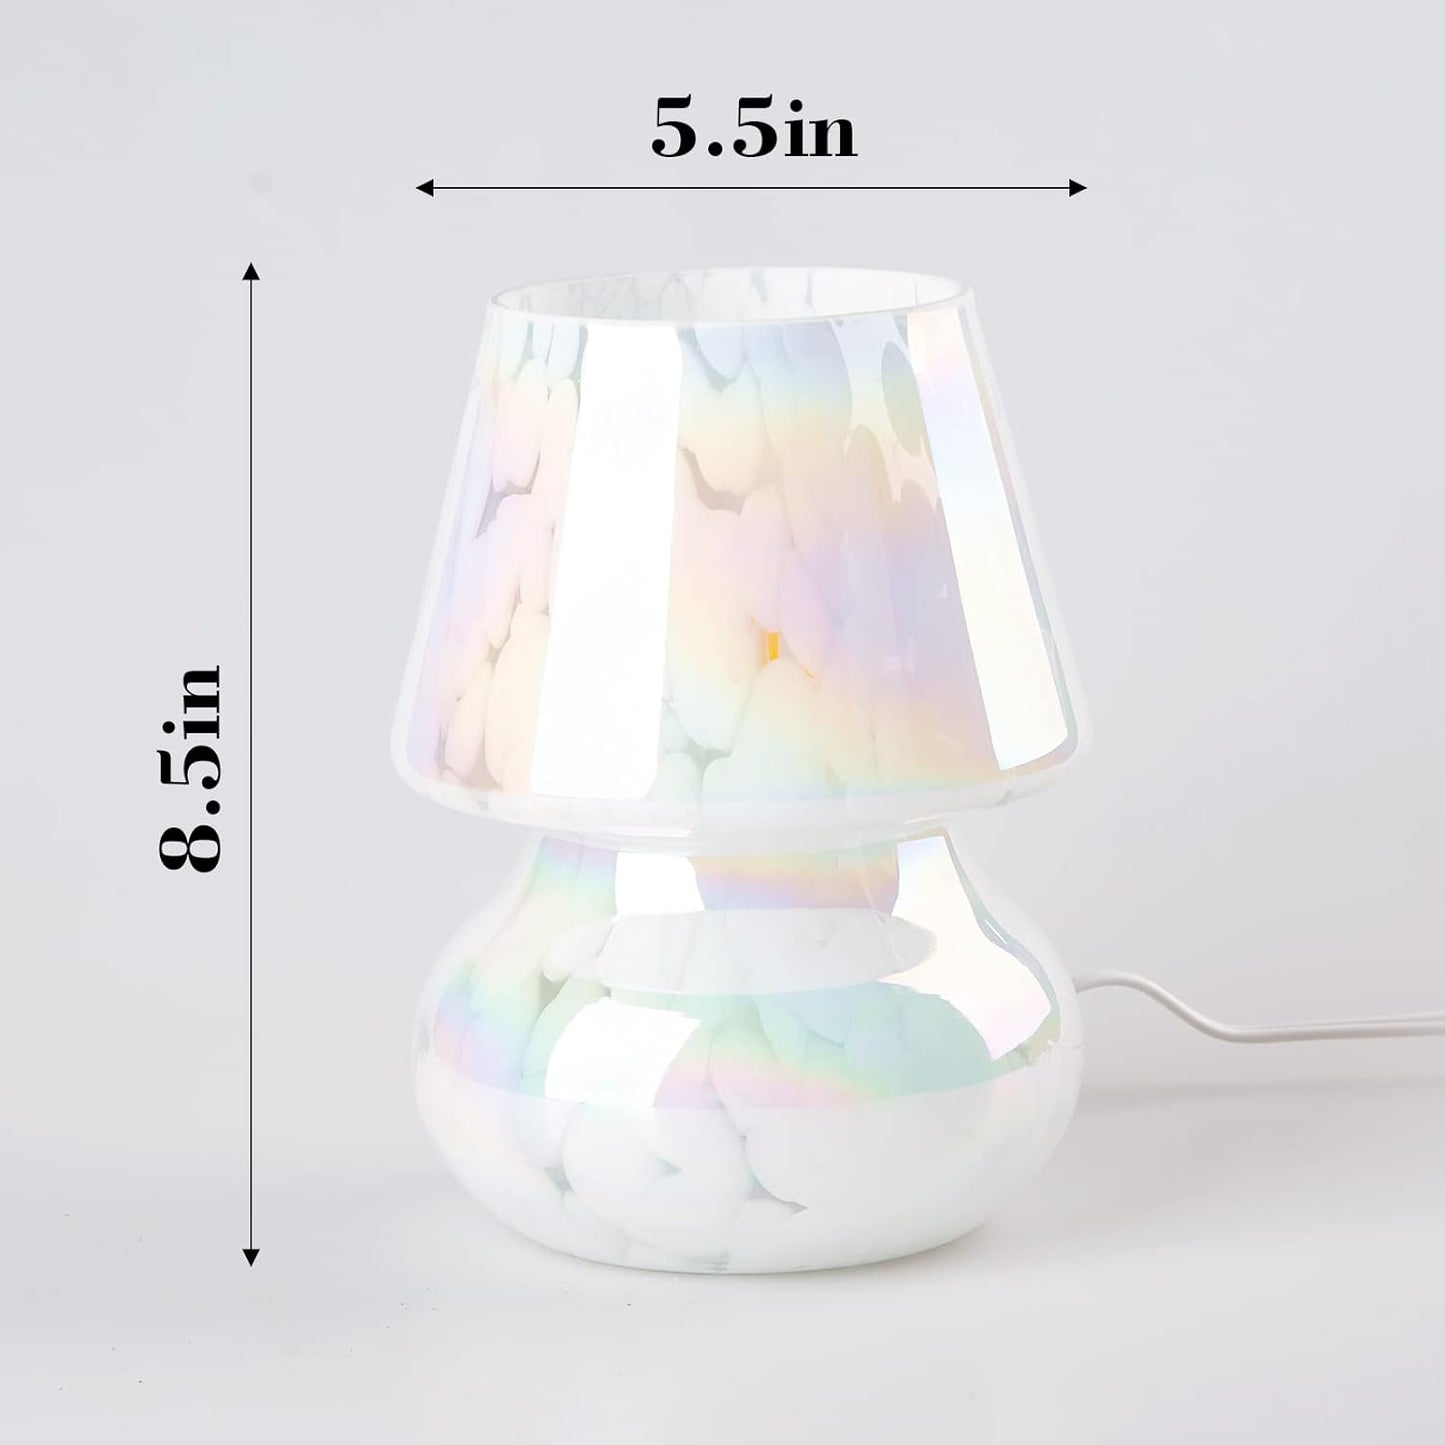 Coosa Mushroom Lamp, Stepless Dimmable Glass Table Bedside Lamps, Cute Small Night Light, Mushroom Decor Light for Ambient,Kids,Bedroom,Living,Girl Gift（Colorful Cloud） theluminousdecor